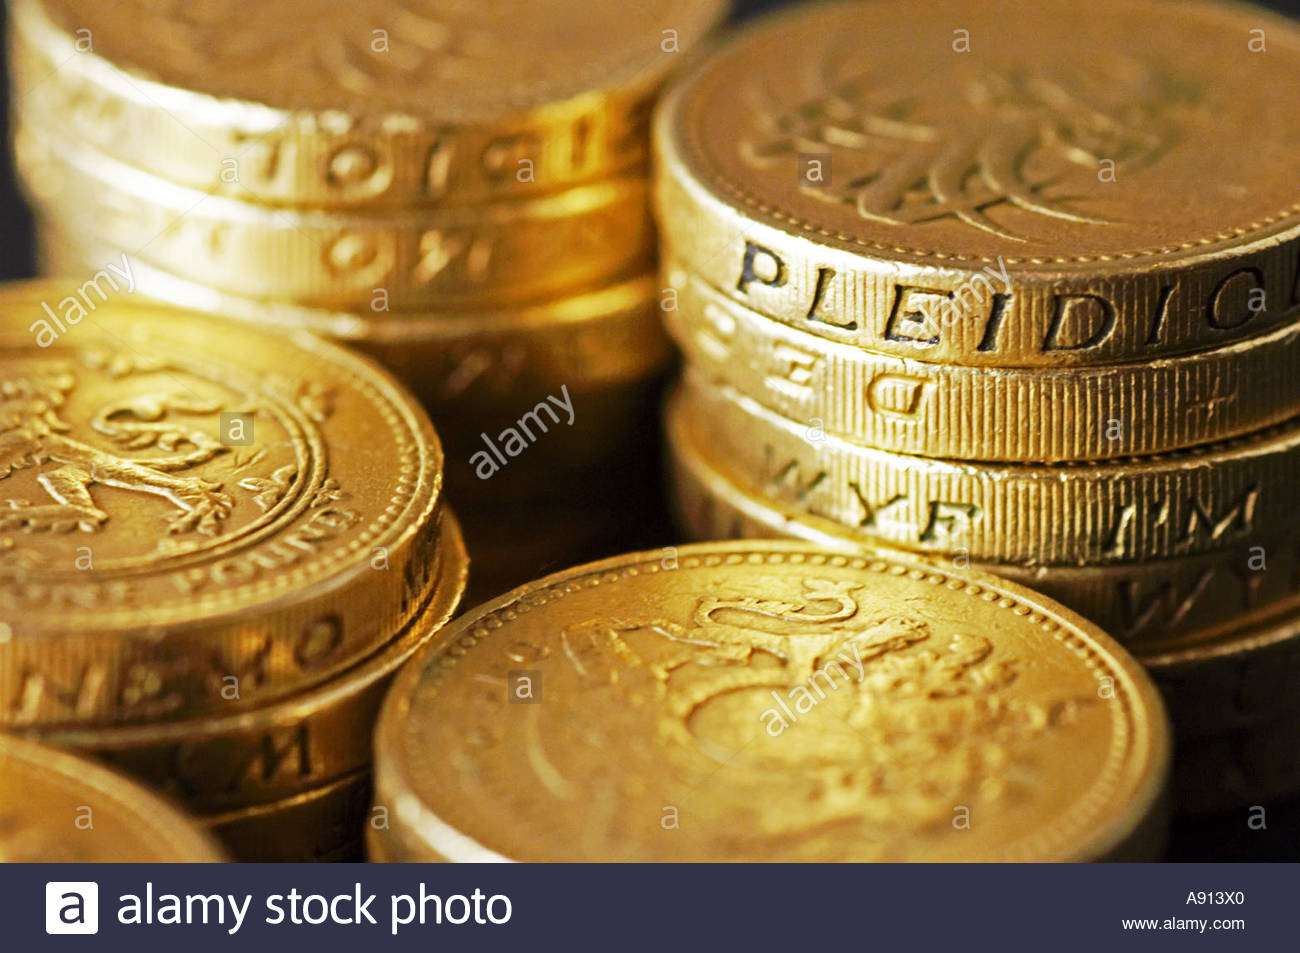 A stack of old style UK Pound Coins Stock Photo